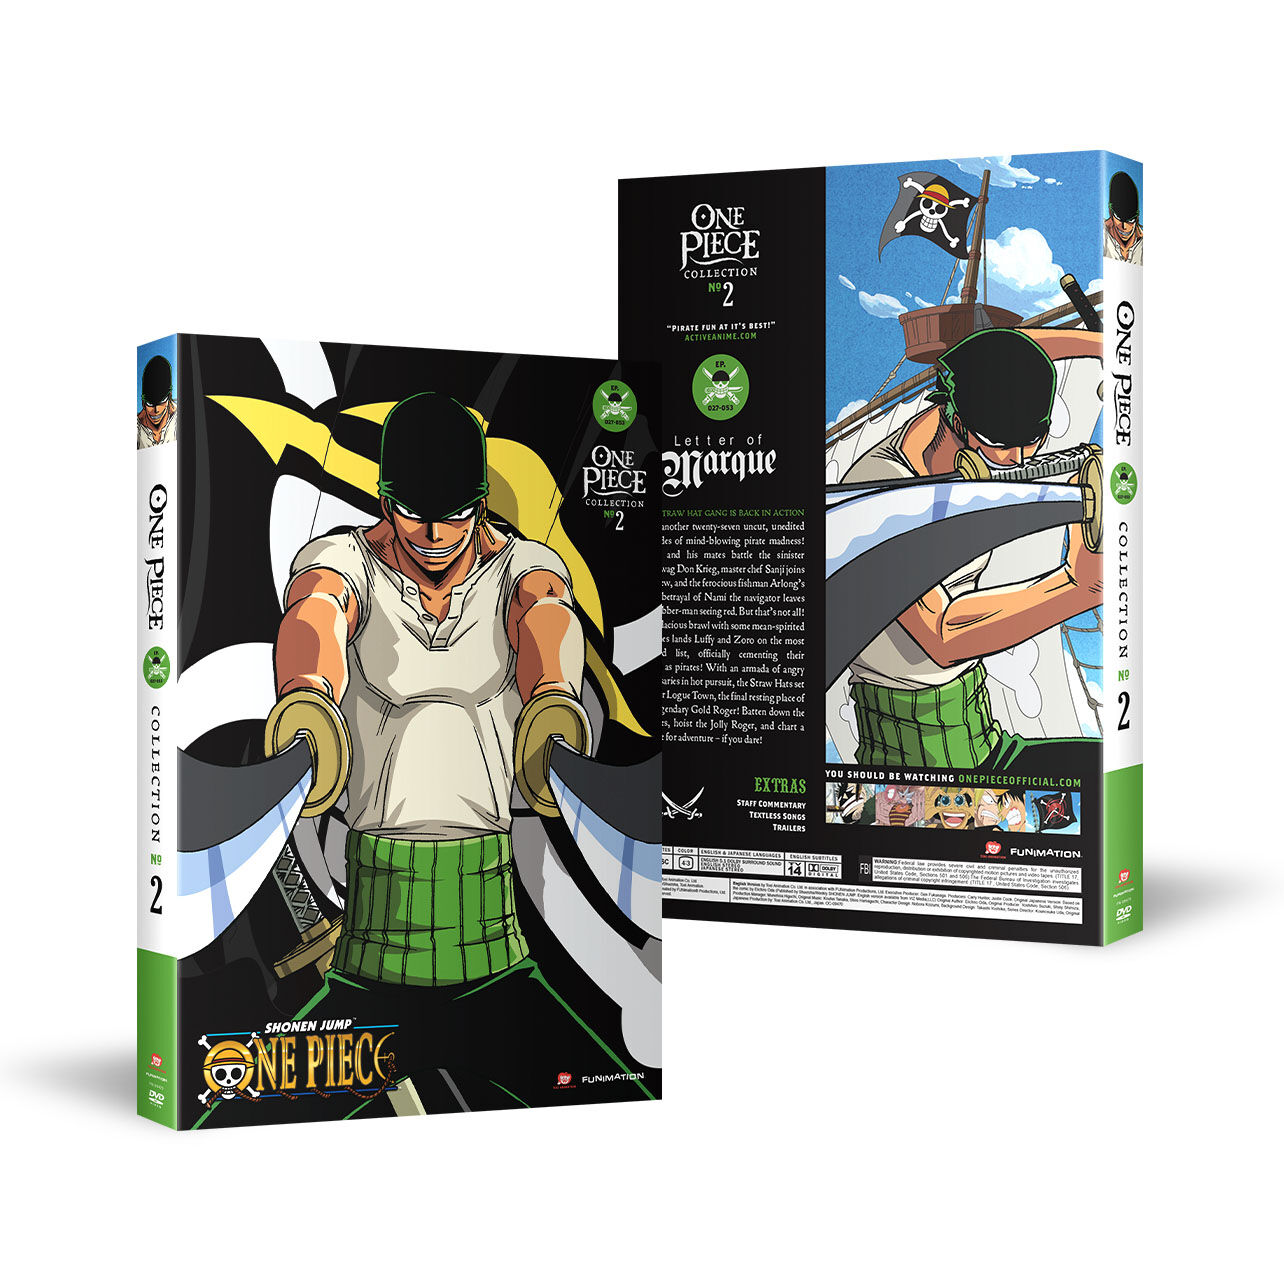 One Piece - Collection 2 - DVD | Crunchyroll Store